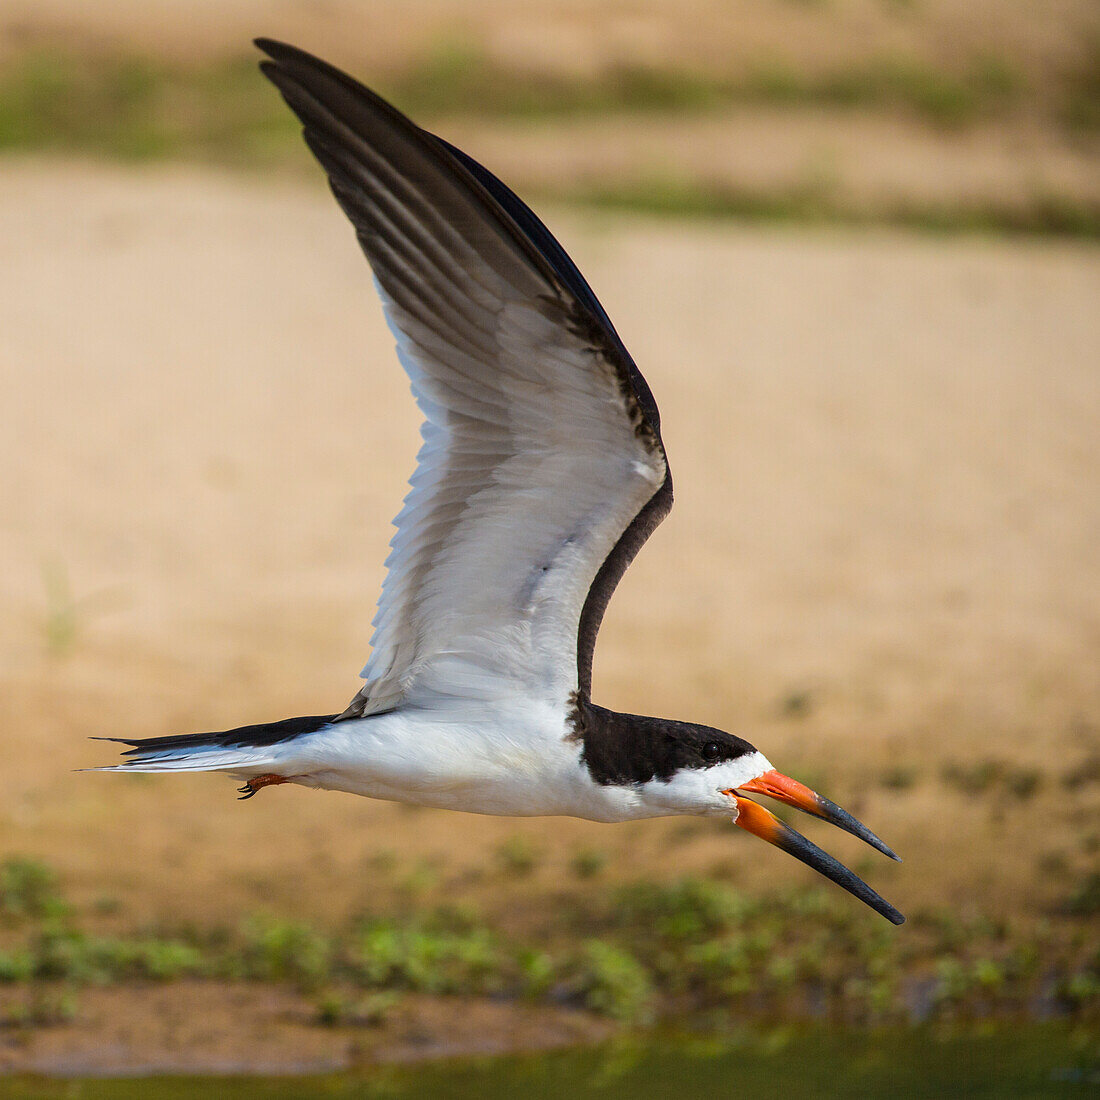 Brazil. A black skimmer (Rynchops Niger) in the Pantanal, the world's largest tropical wetland area, UNESCO World Heritage Site.